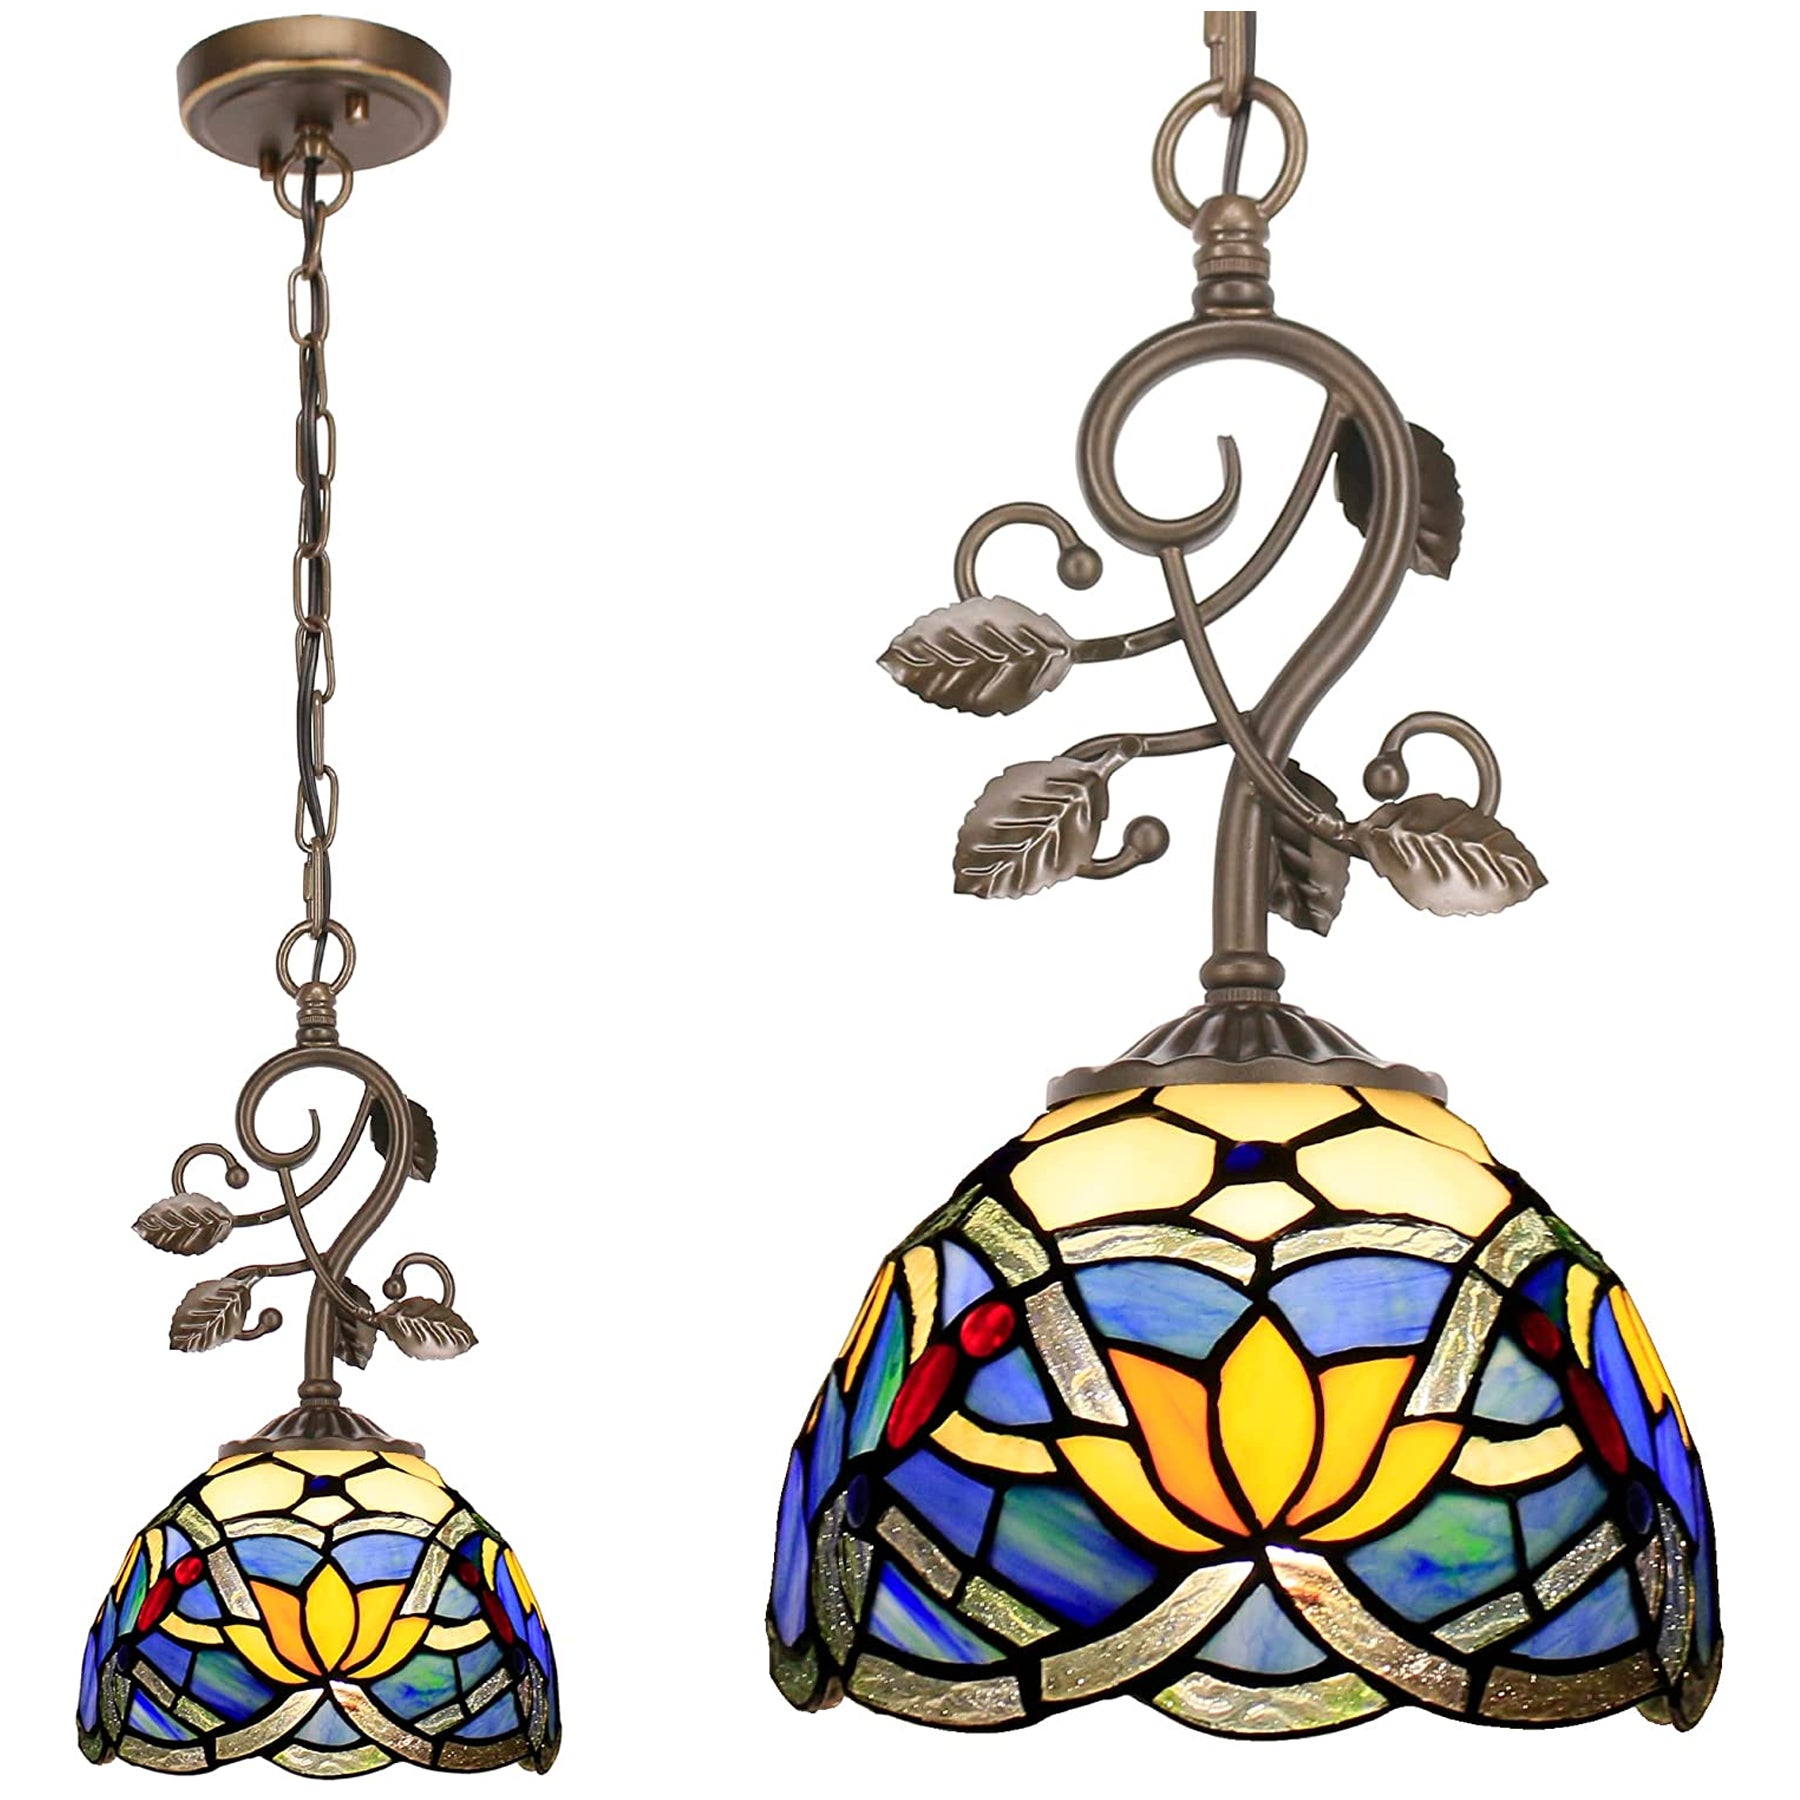 Werfactory® Tiffany Pendant Lighting for Kitchen, 8" Blue Stained Glass Lotus Hanging Lamp Farmhouse Rustic Bronze Thin Metal Leaf Chandelier, Luxury Ceiling Light Fixture for Living Room Dining Room